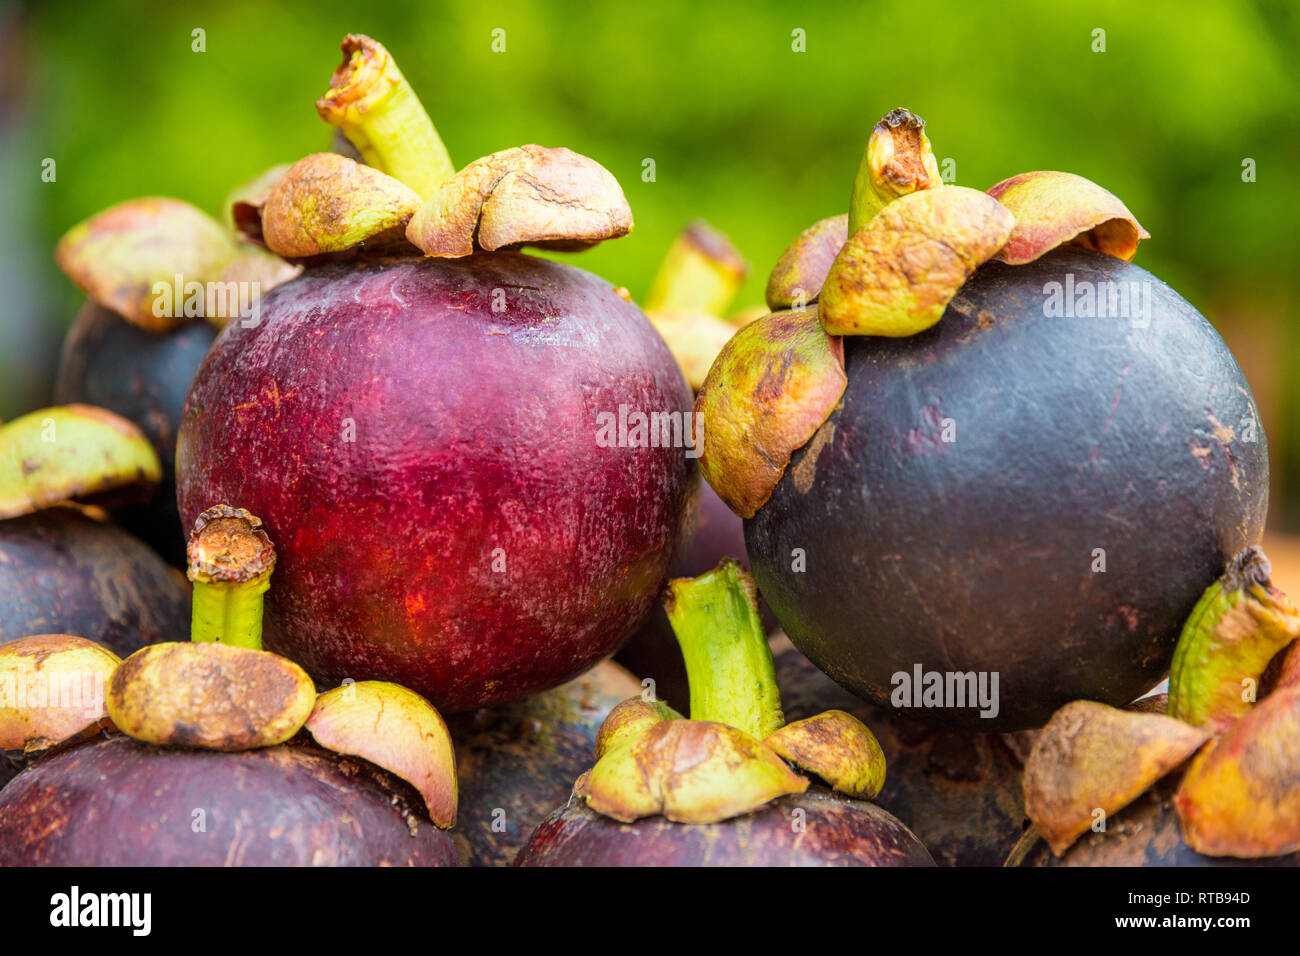 Lovely picture of two ripe reddish-purple mangosteen (Garcinia mangostana) fruits, stacked on top of each other. The fruits with their green stems are... Stock Photo